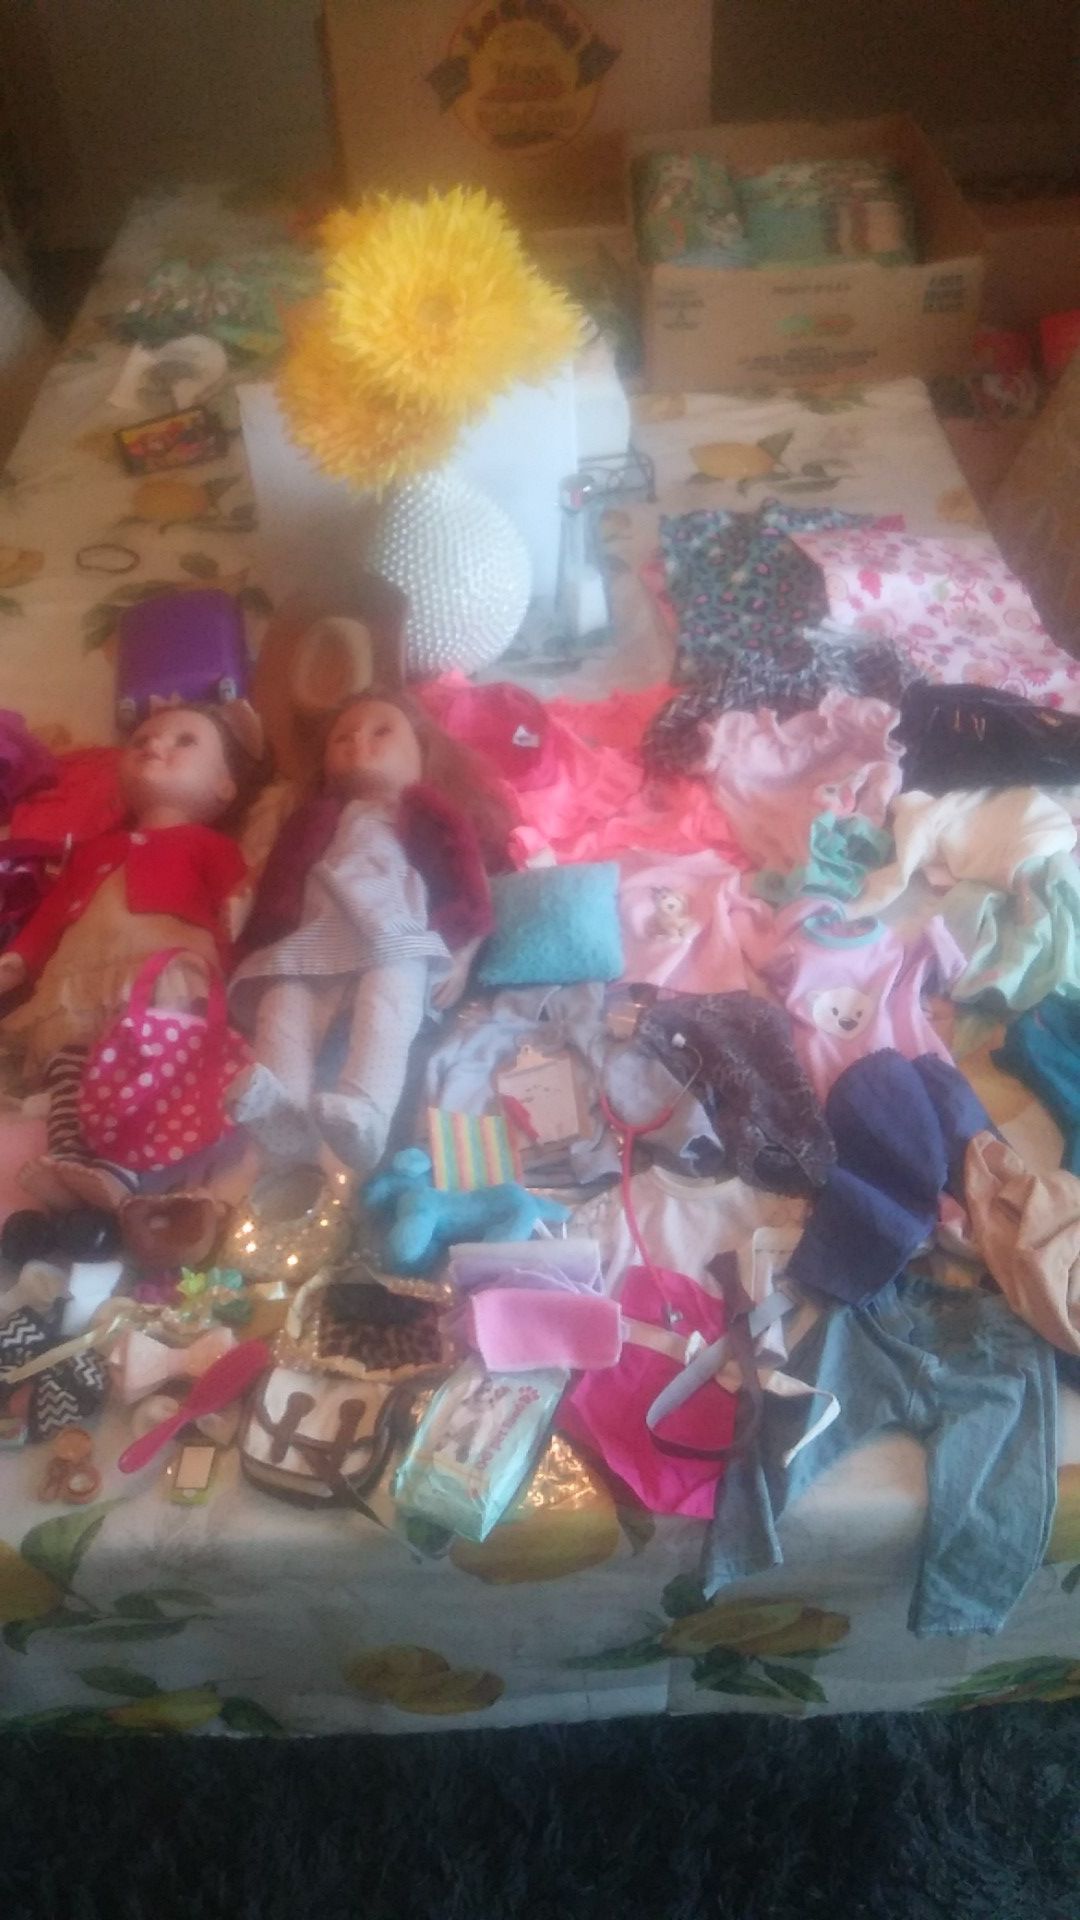 American girl dolls with a ton if accesorys